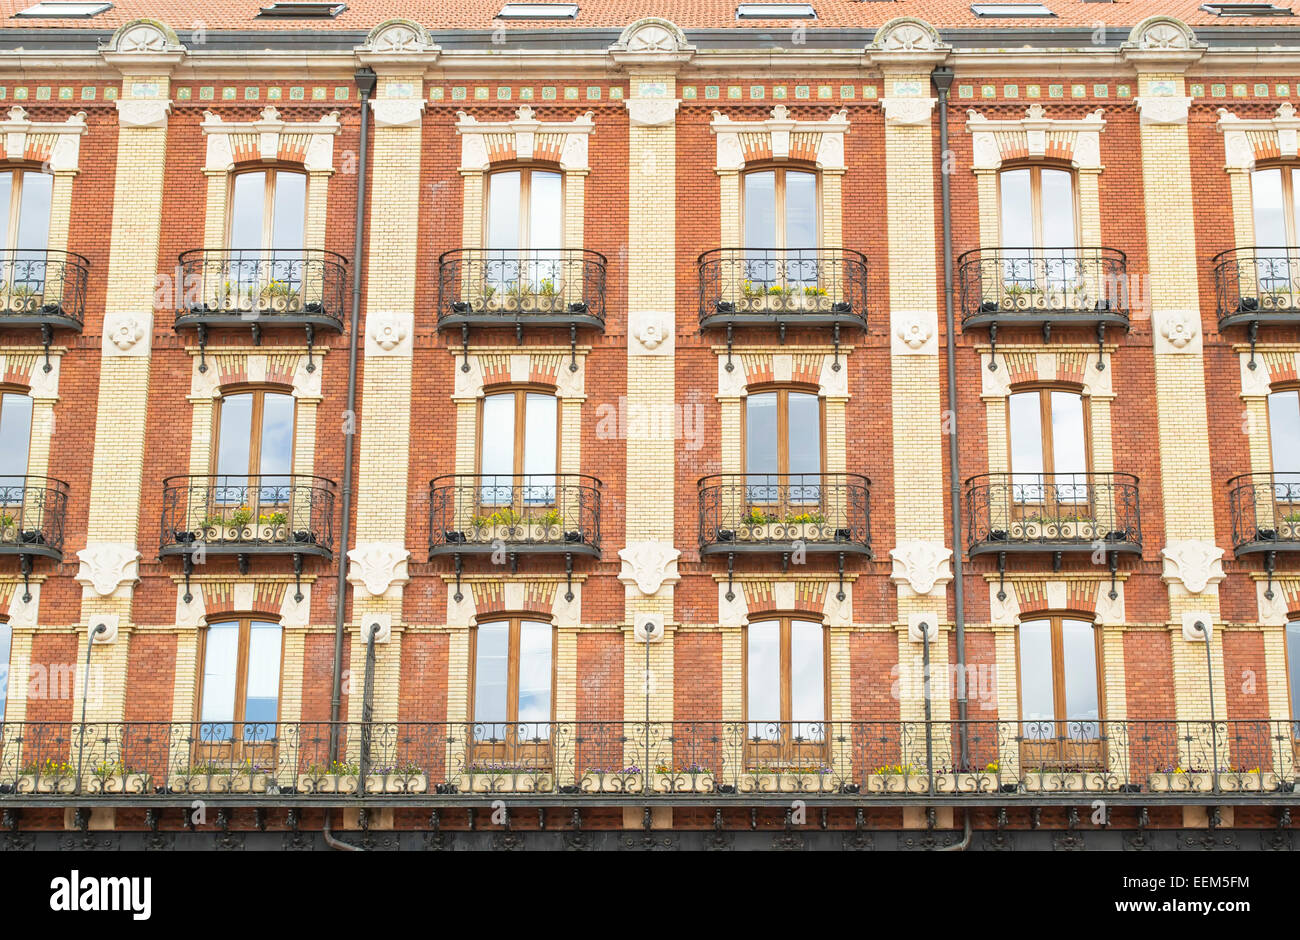 Apartment building facade with rows of balconies in European style Stock Photo